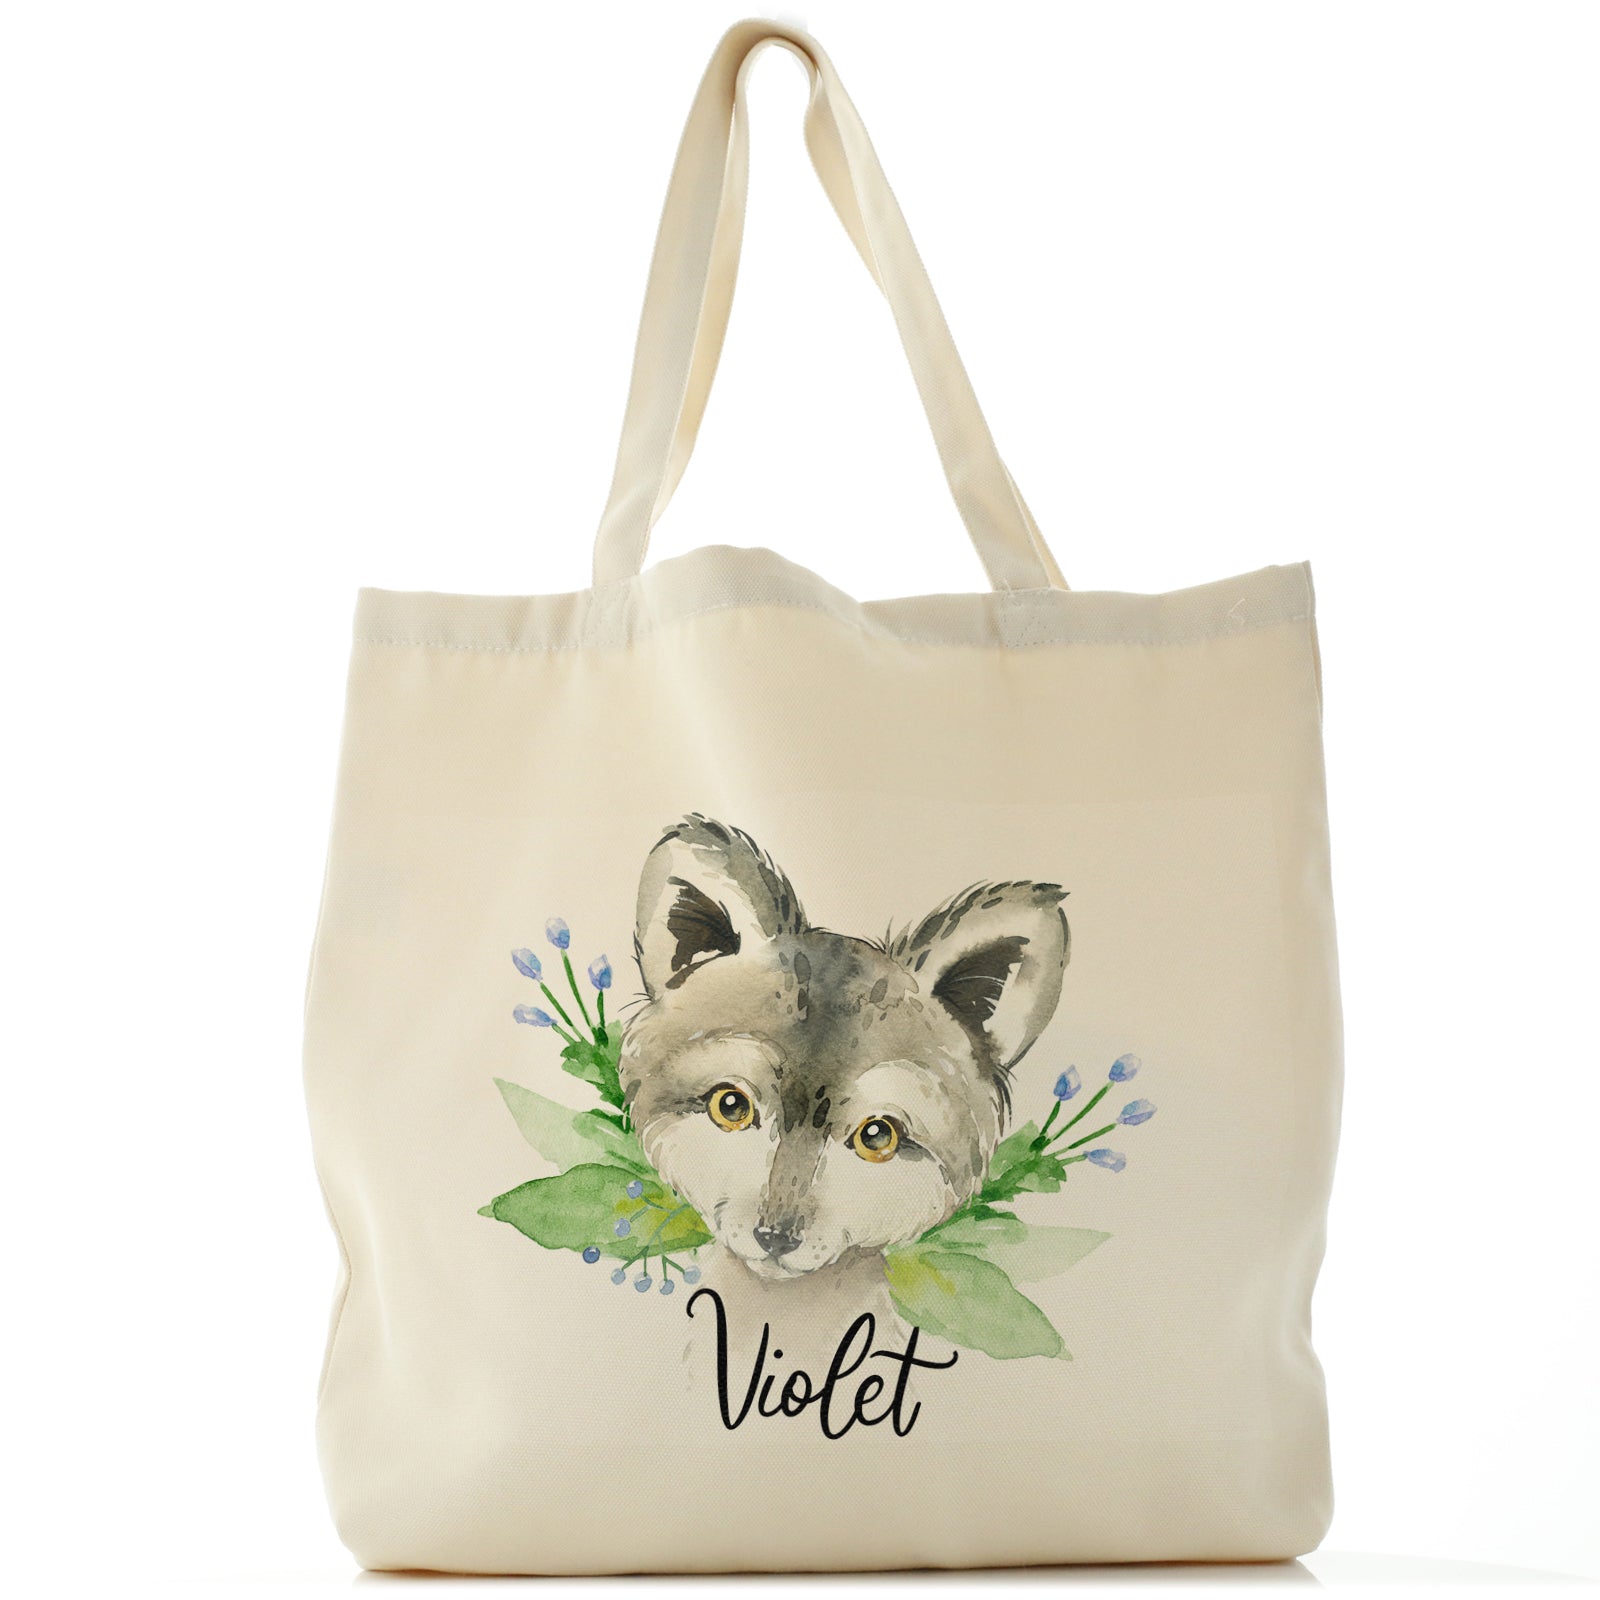 Personalised Canvas Tote Bag with Grey Wolf Blue Flowers and Cute Text